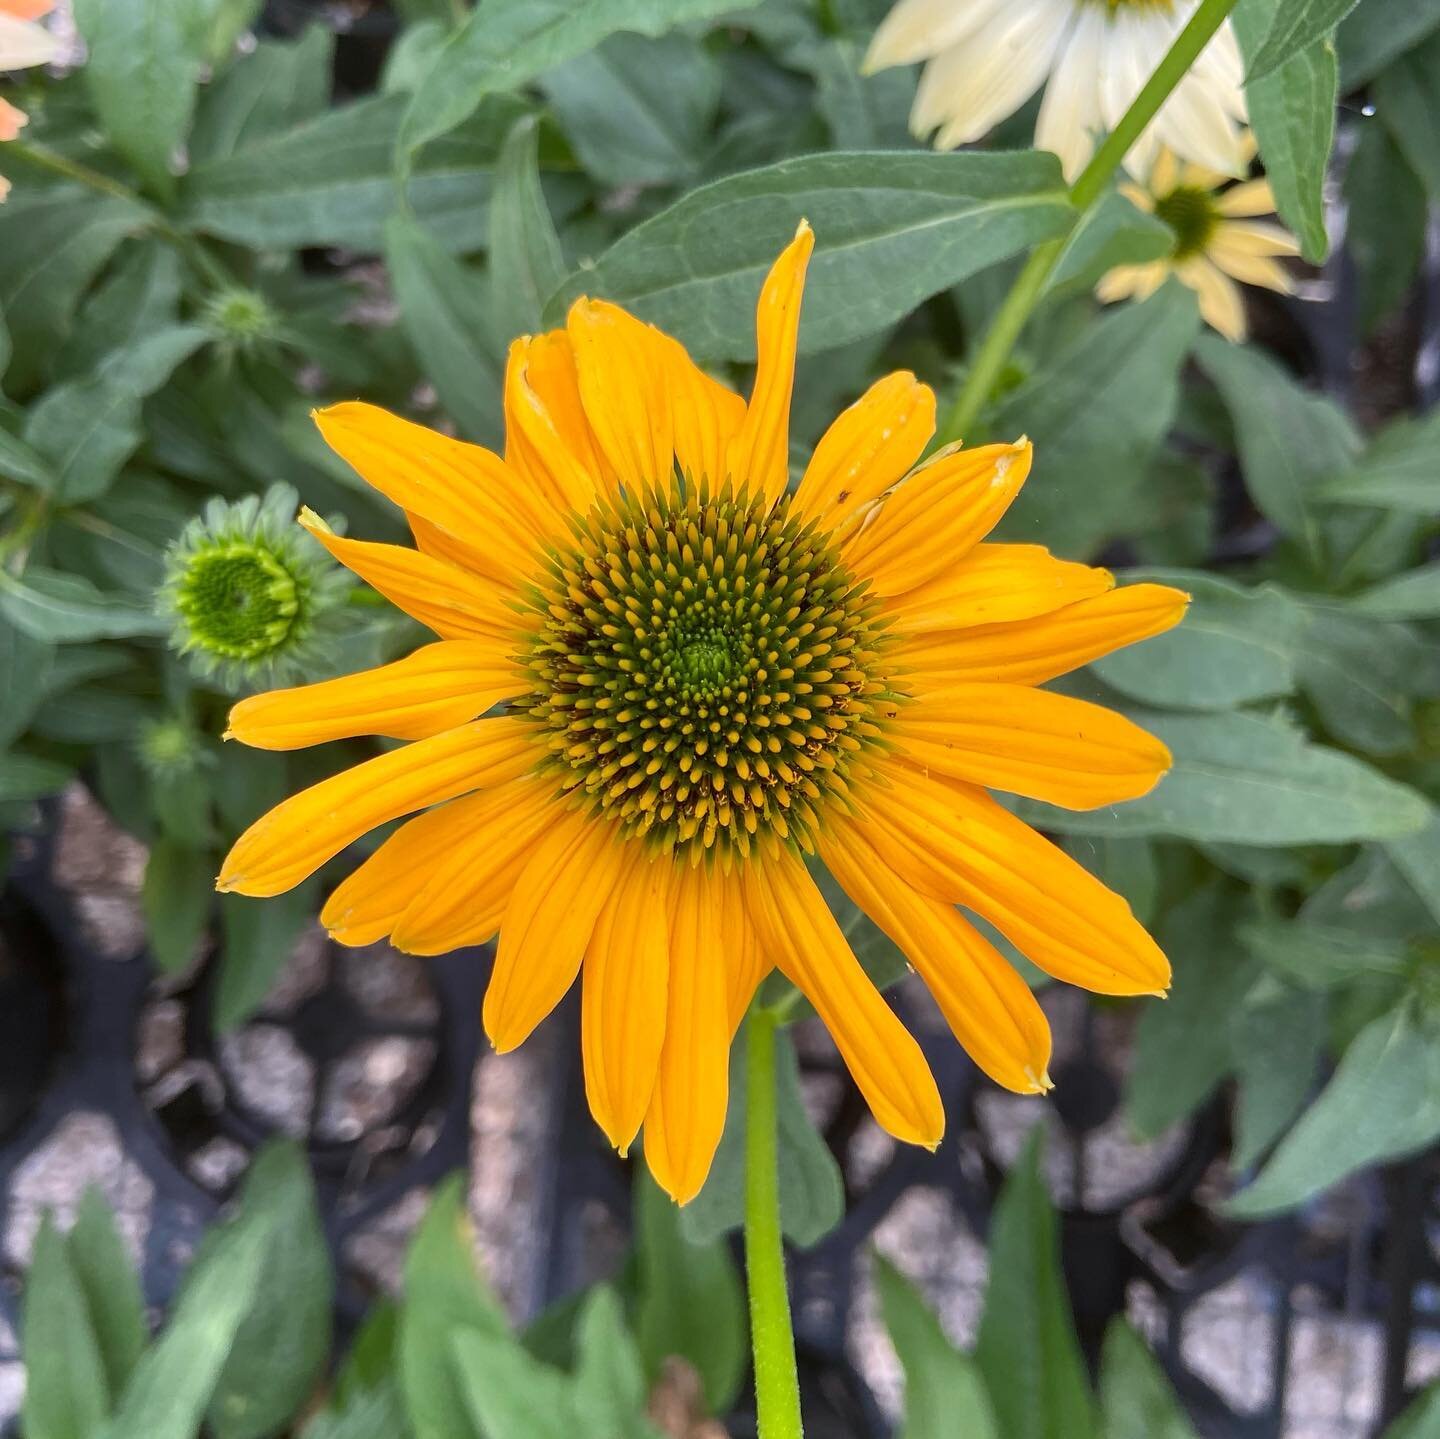 Echinacea Coneflower is a former Perennial Plant of the Year. It does best in full sun ☀️ but will take some shade 🌤 and is tolerant of hot, dry &amp; windy sites. 

It attracts butterflies 🦋 &amp; birds. The spent flowers stems will remain erect w